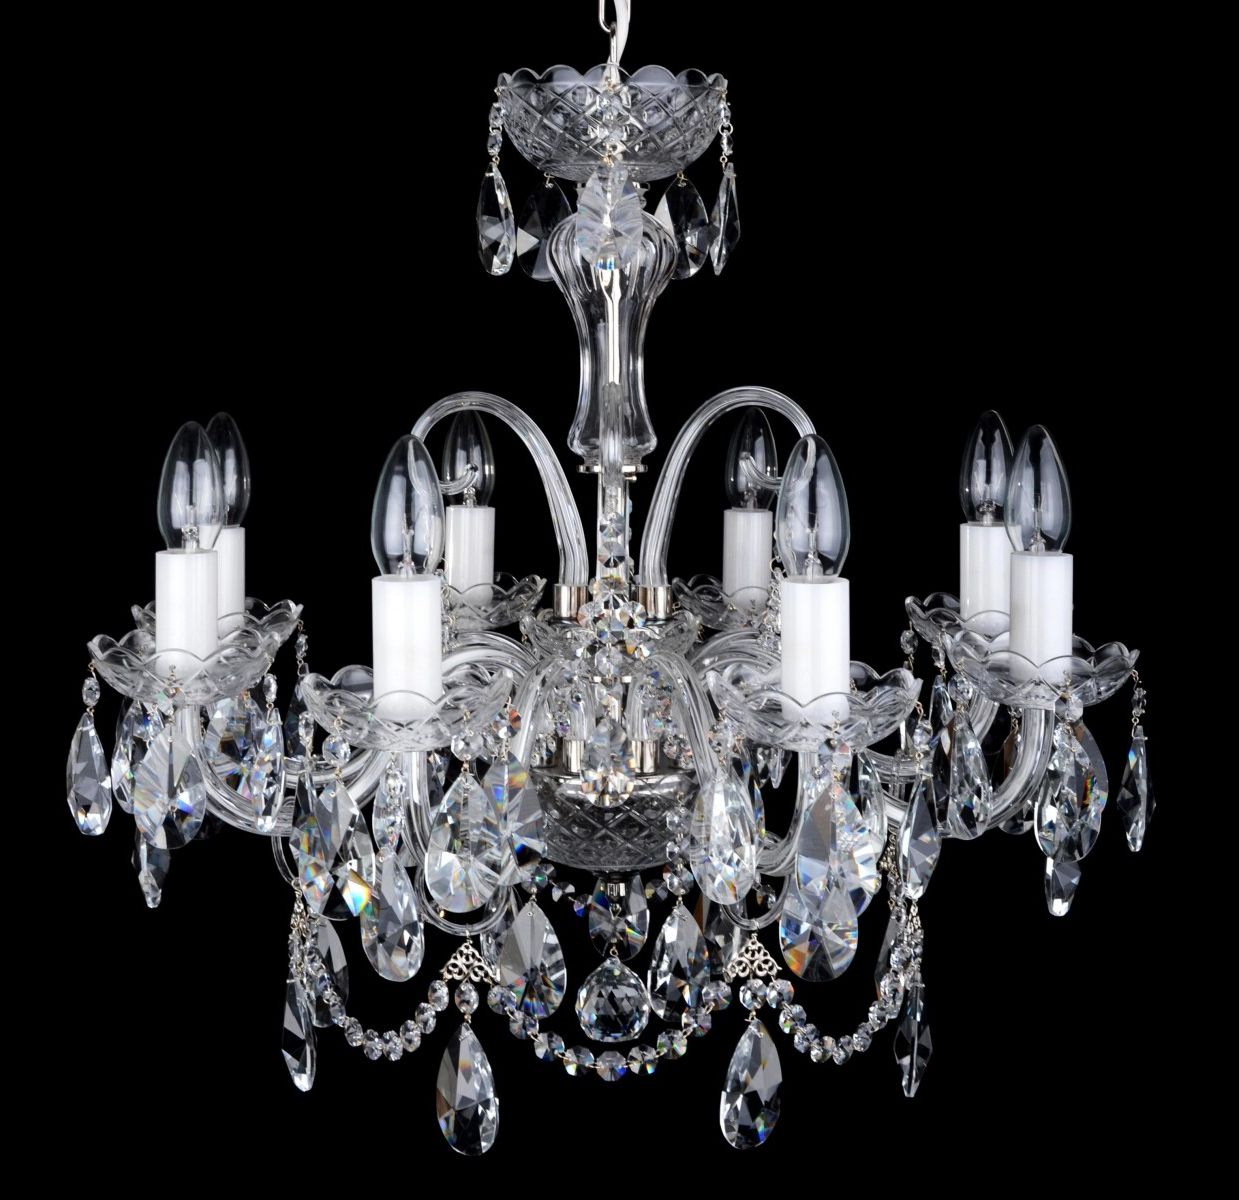 8 Arms Silver Crystal Chandelier With Cut Crystal Almonds In Most Recent Soft Silver Crystal Chandeliers (View 6 of 15)